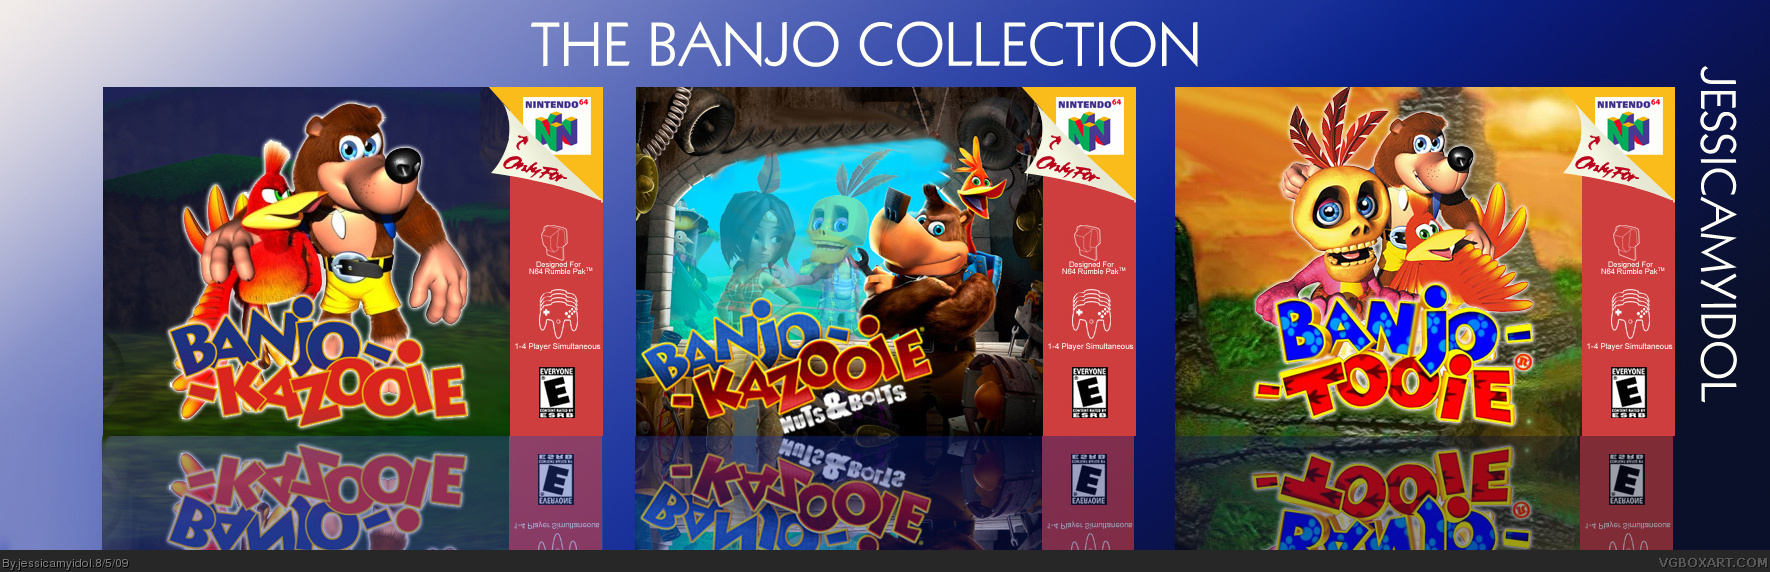 The Banjo Collection box cover